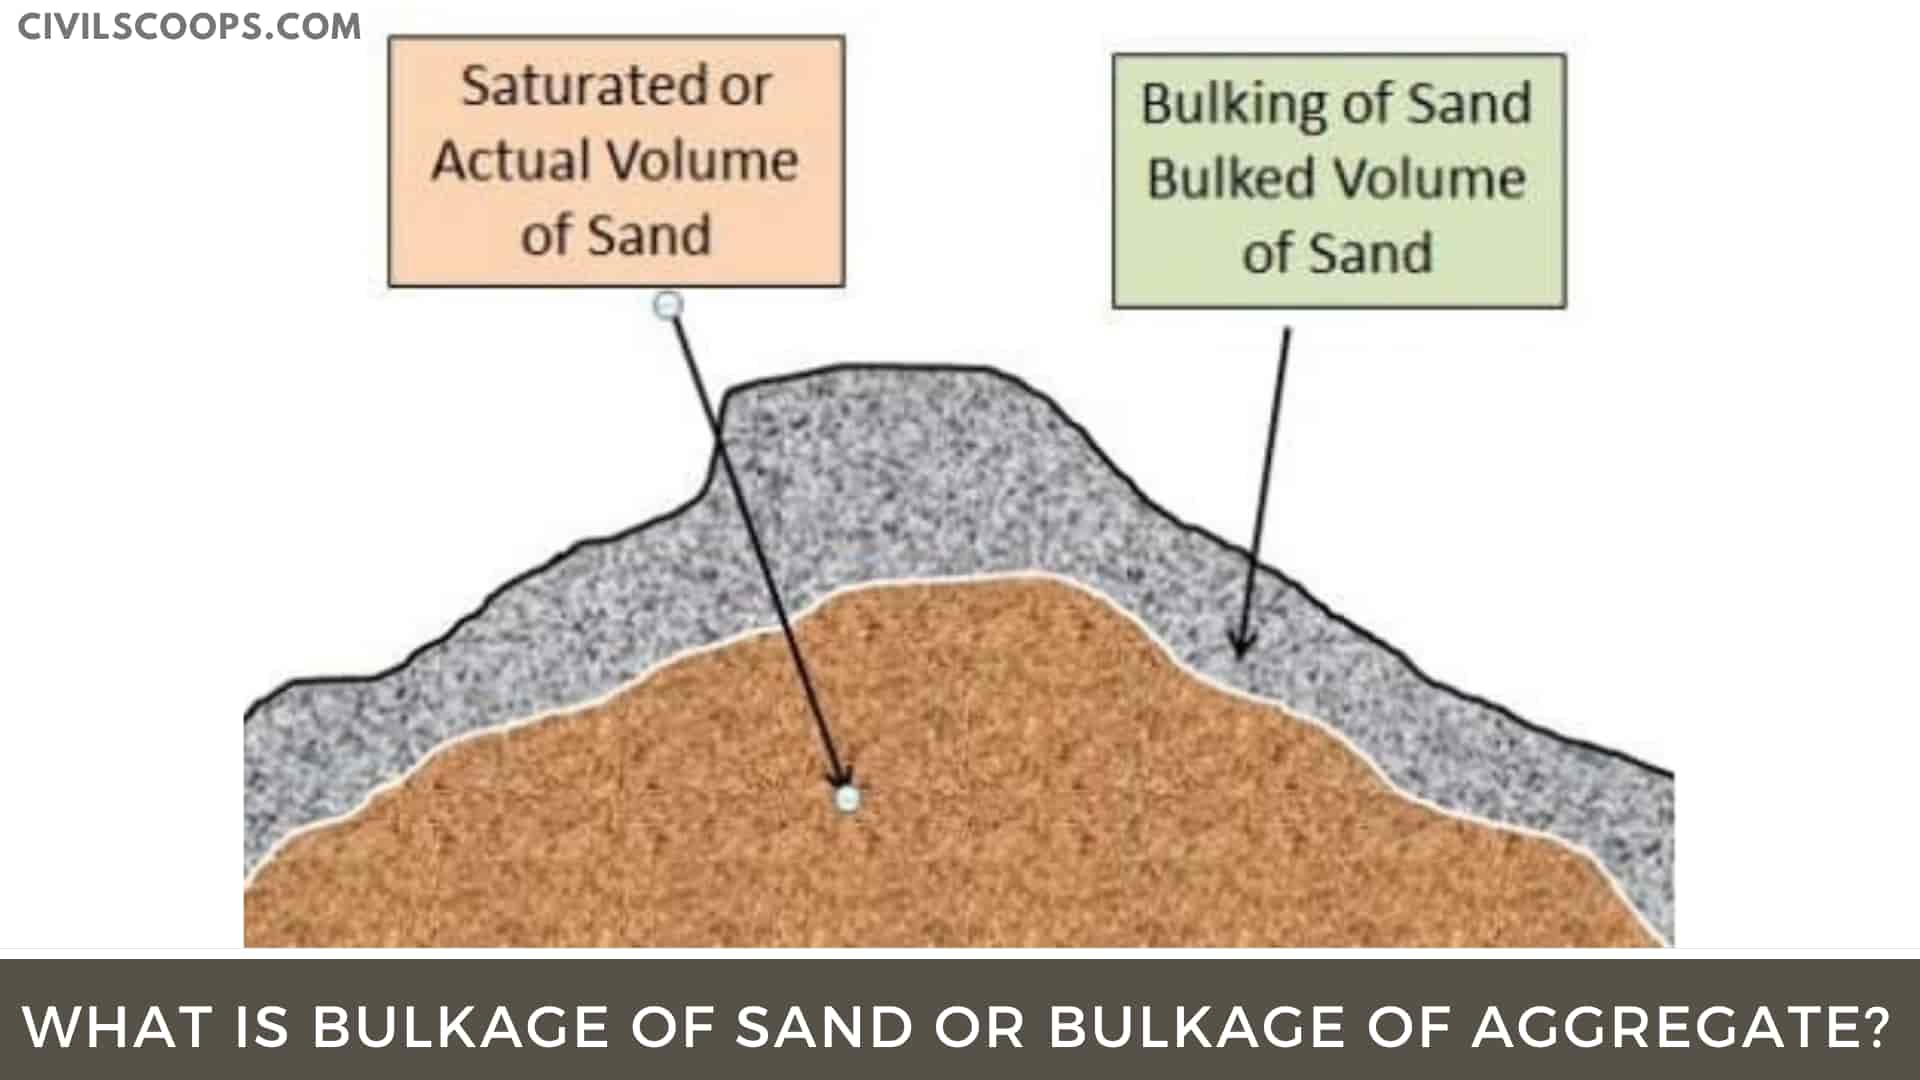 What is Bulkage of Sand or Bulkage of Aggregate?